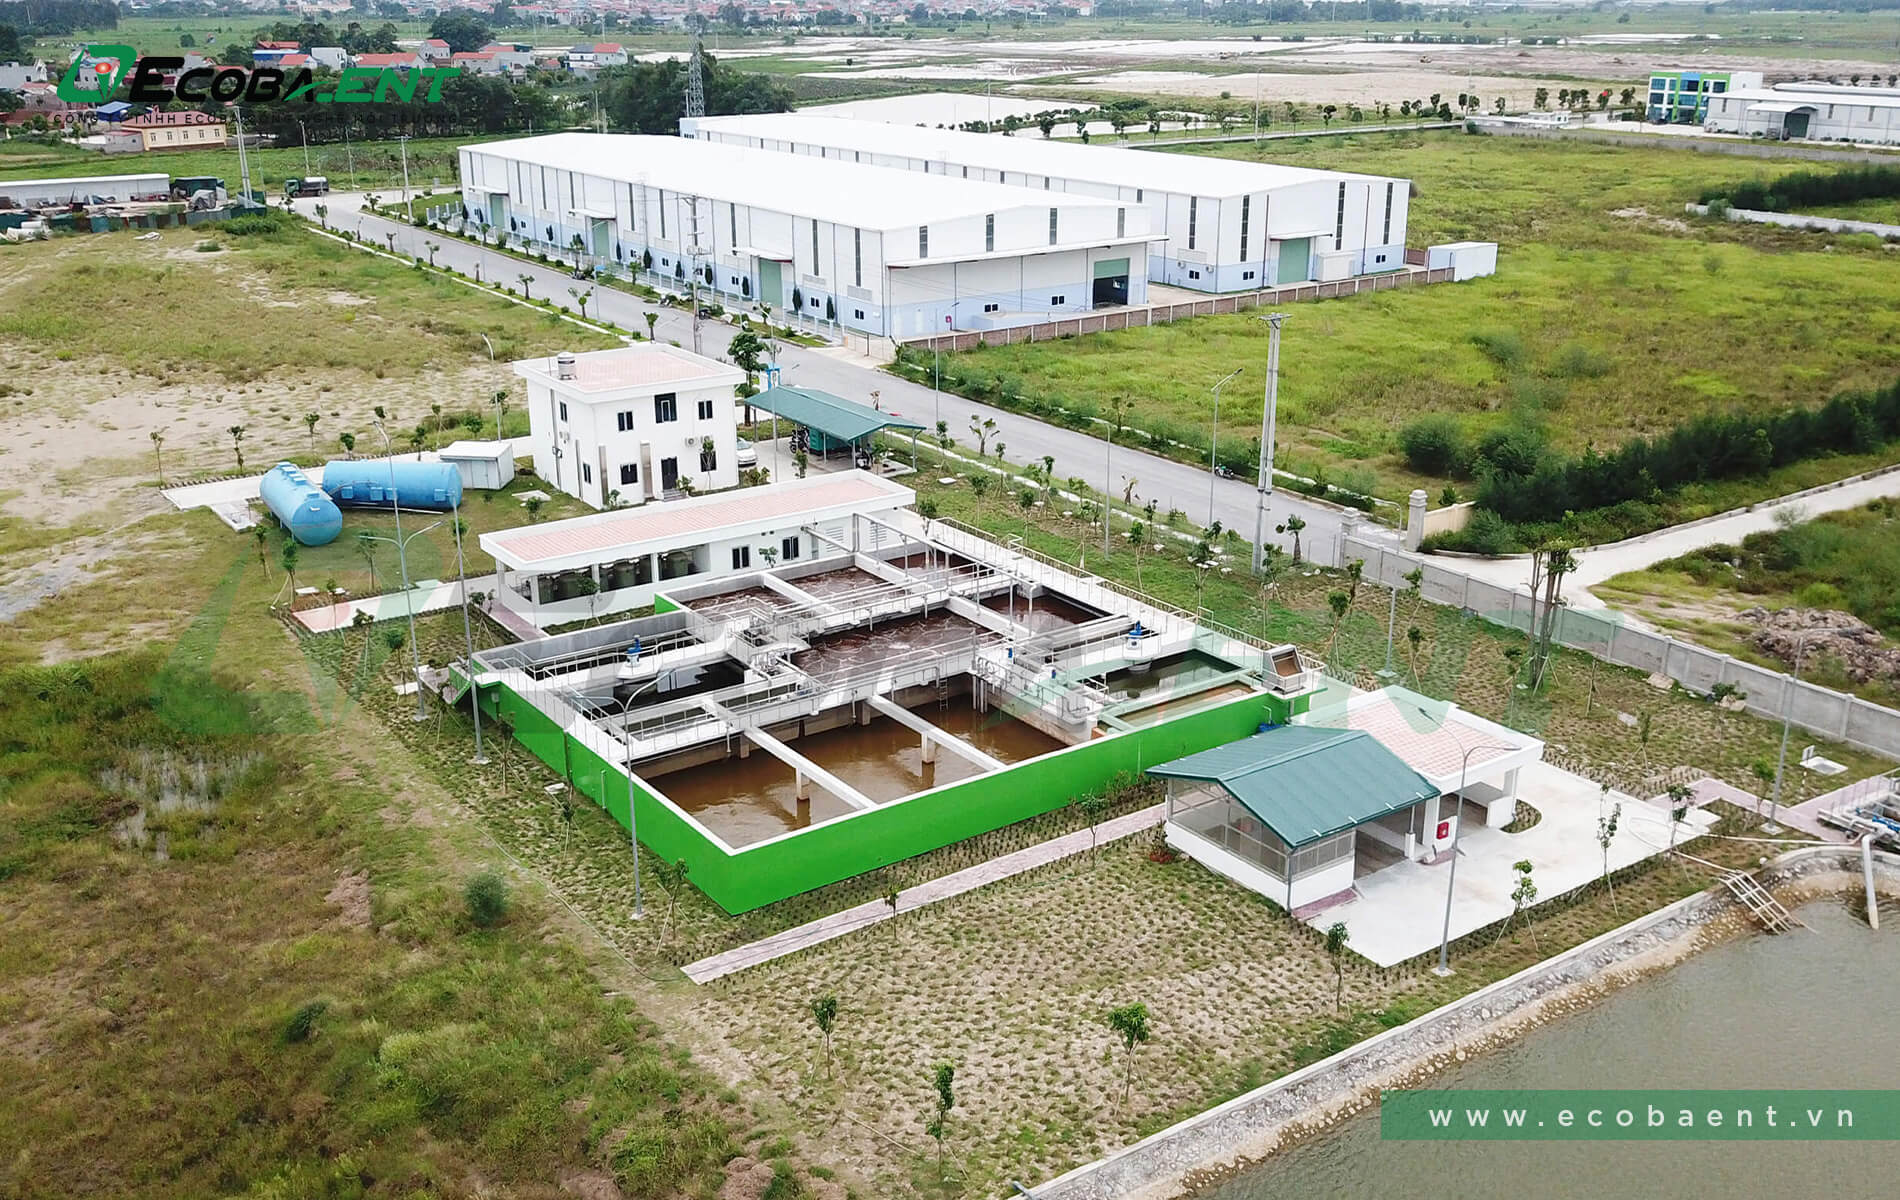 The centralized wastewater treatment plant for Yen My industrial park